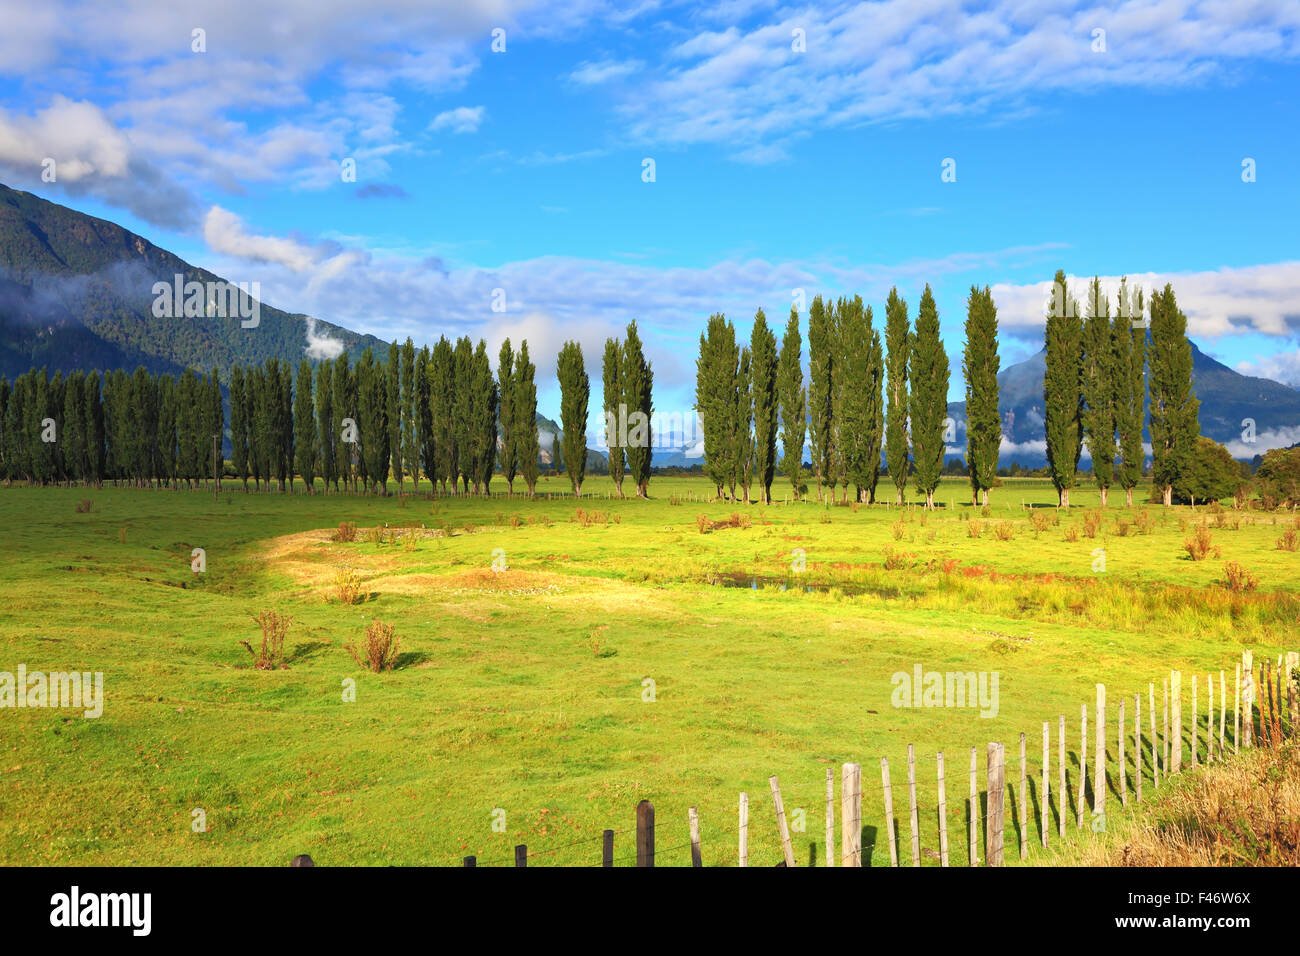 Along green fields avenues of cypresses grow Stock Photo